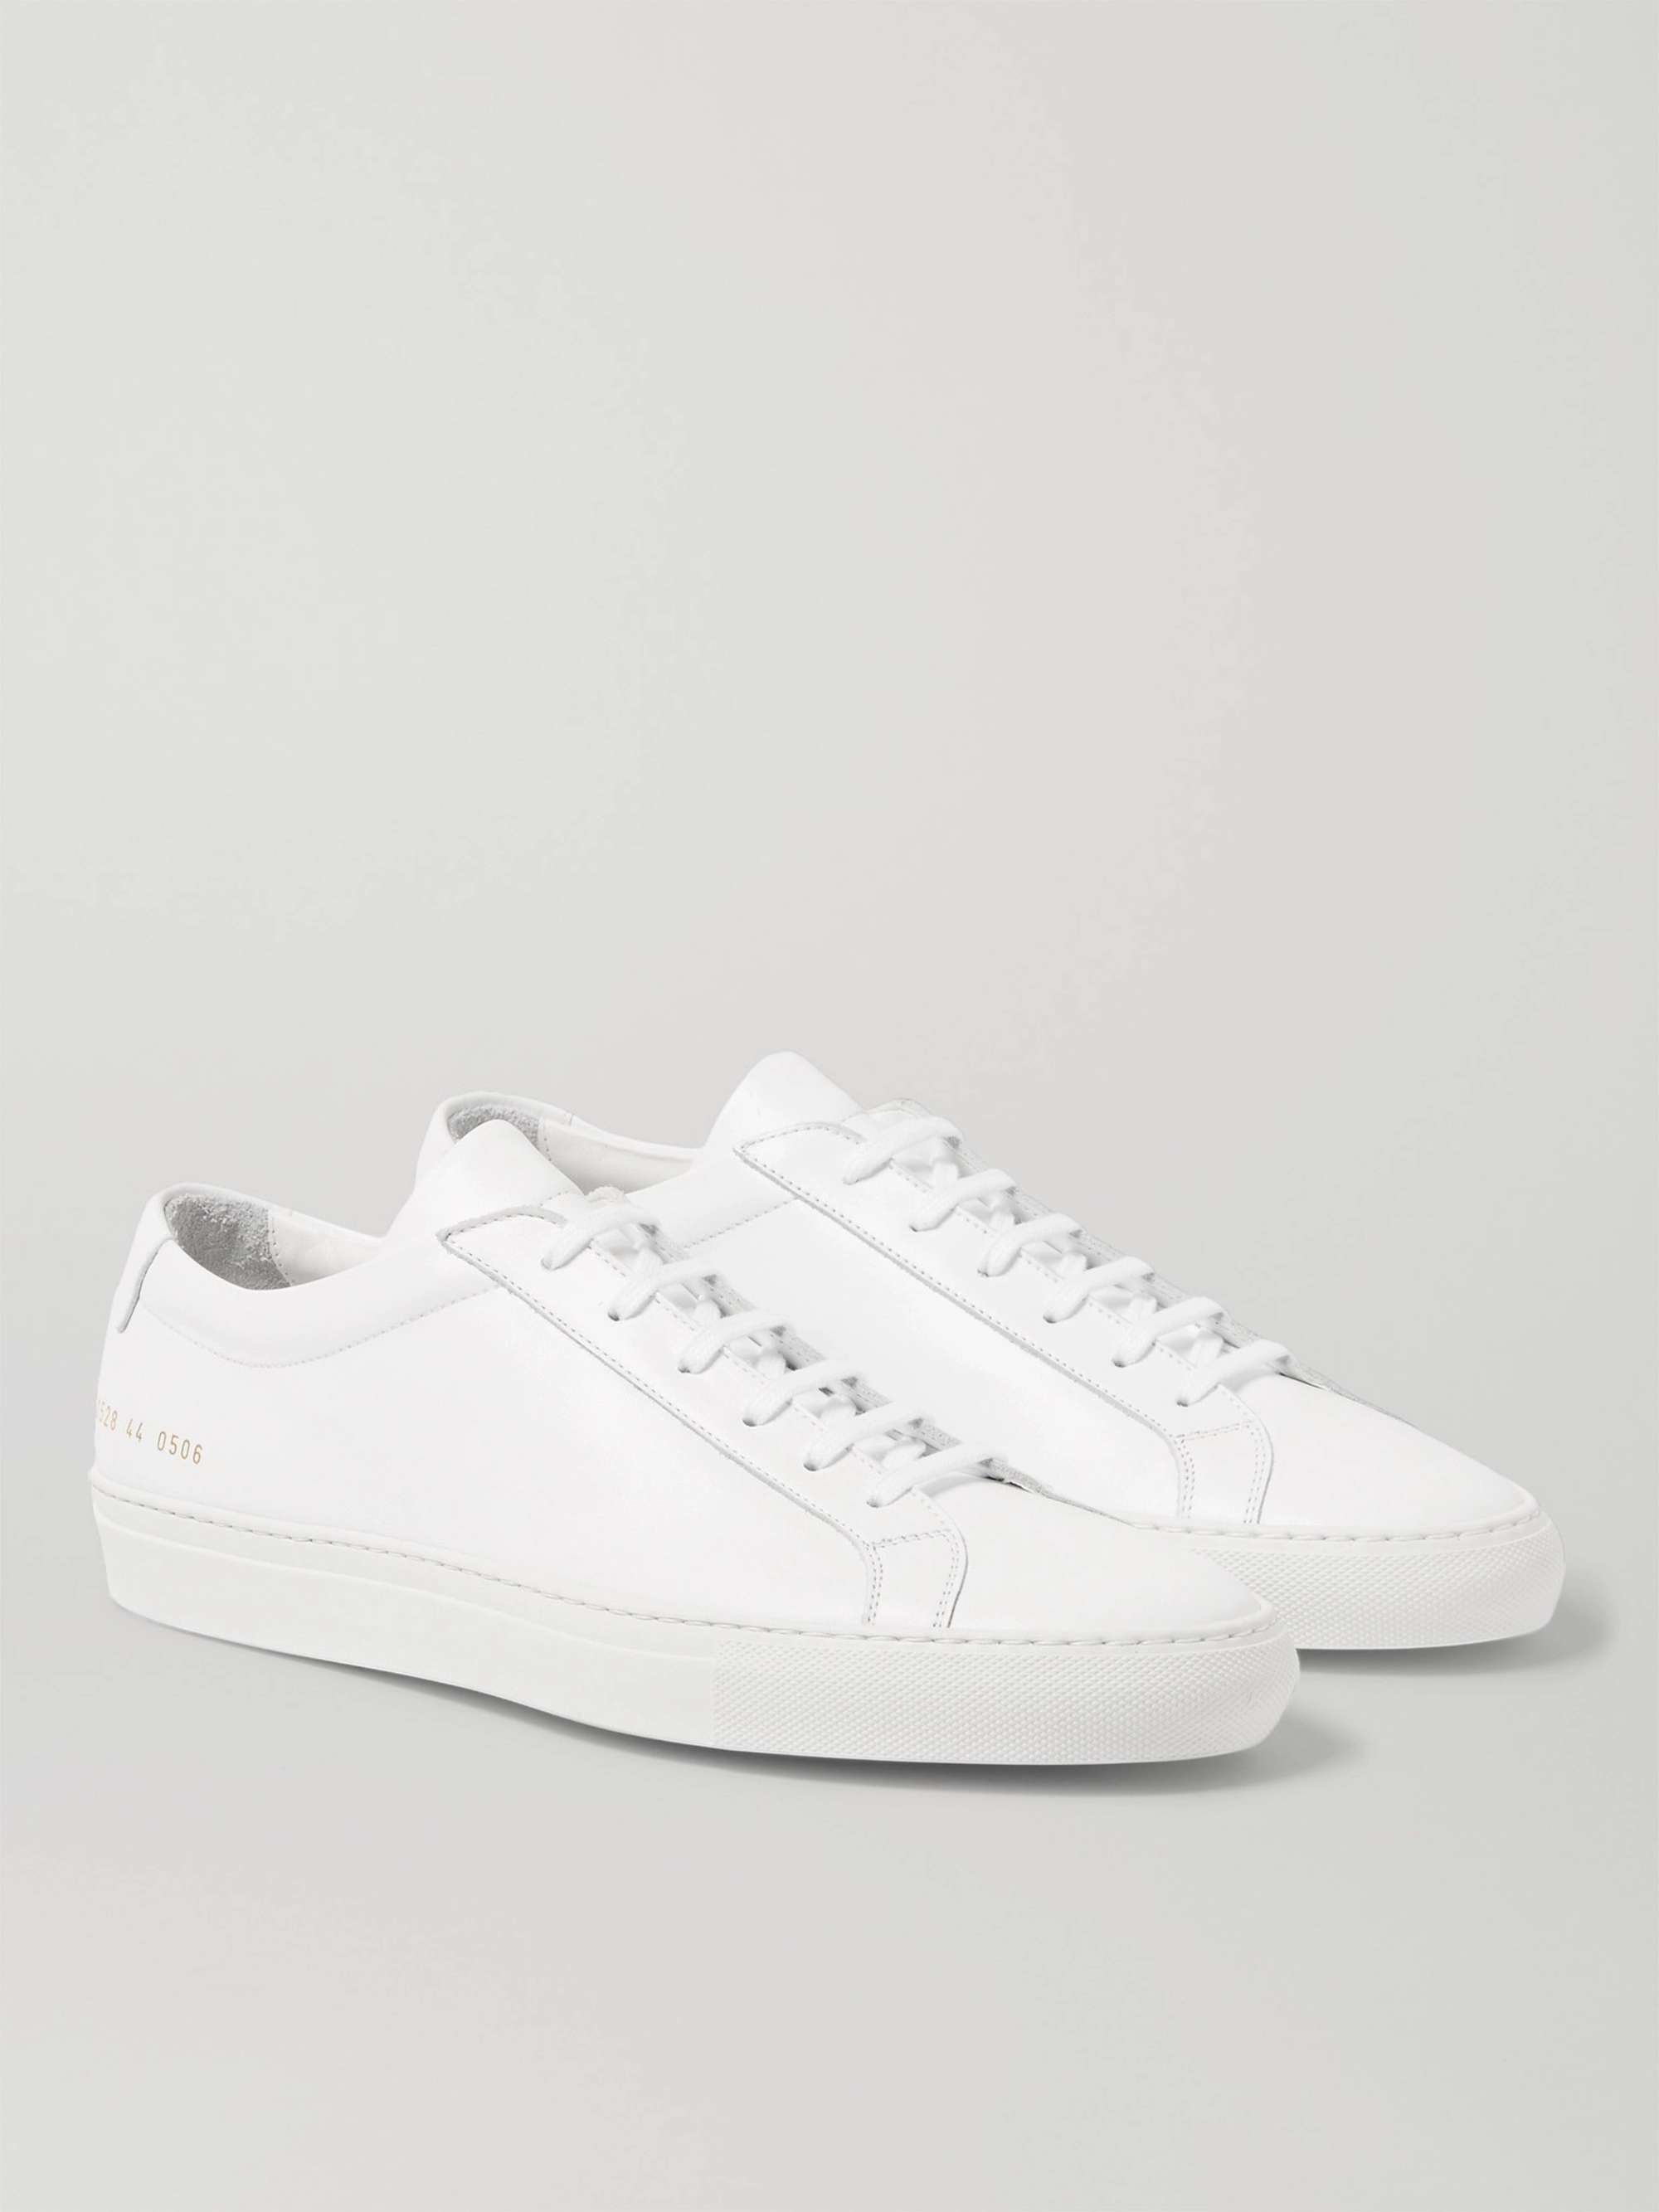 COMMON PROJECTS Leather for Men MR PORTER